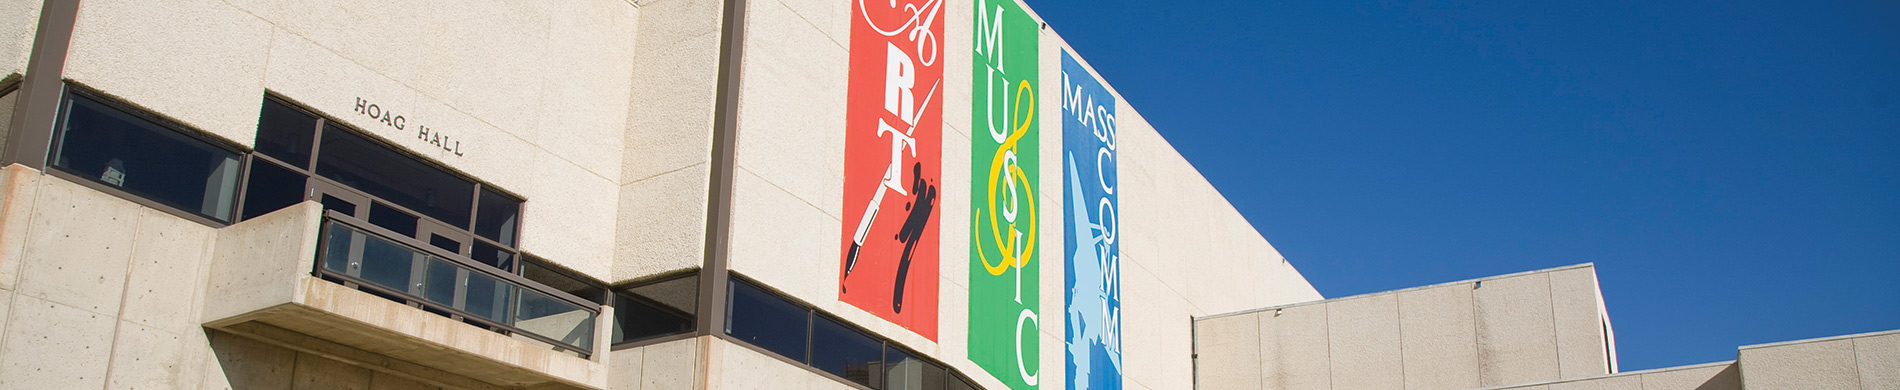 The Art and Music building displaying banners of CHASS